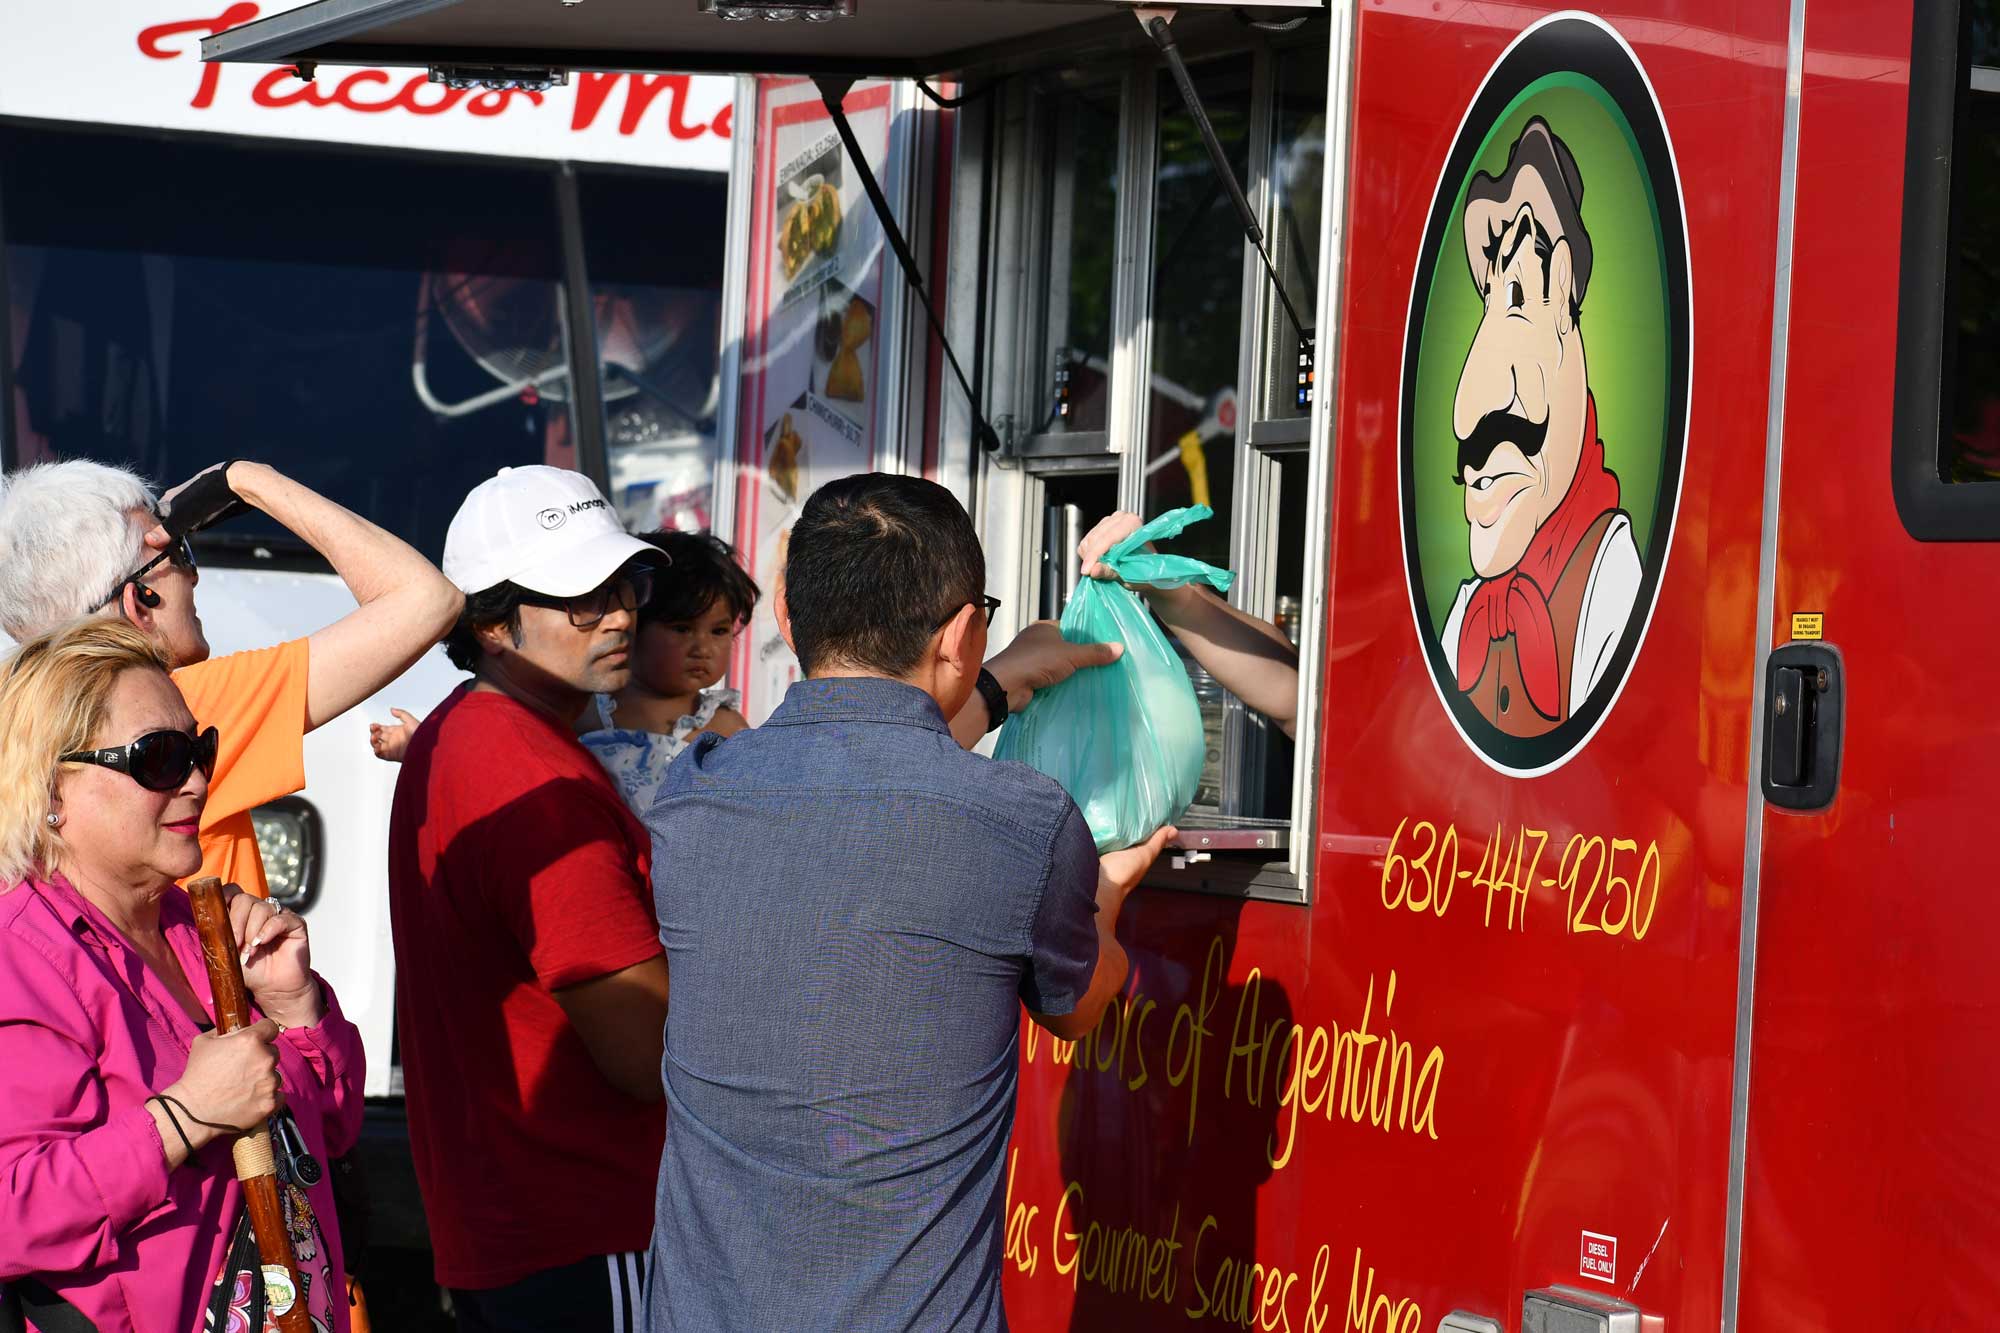 People order food from a mobile food truck.